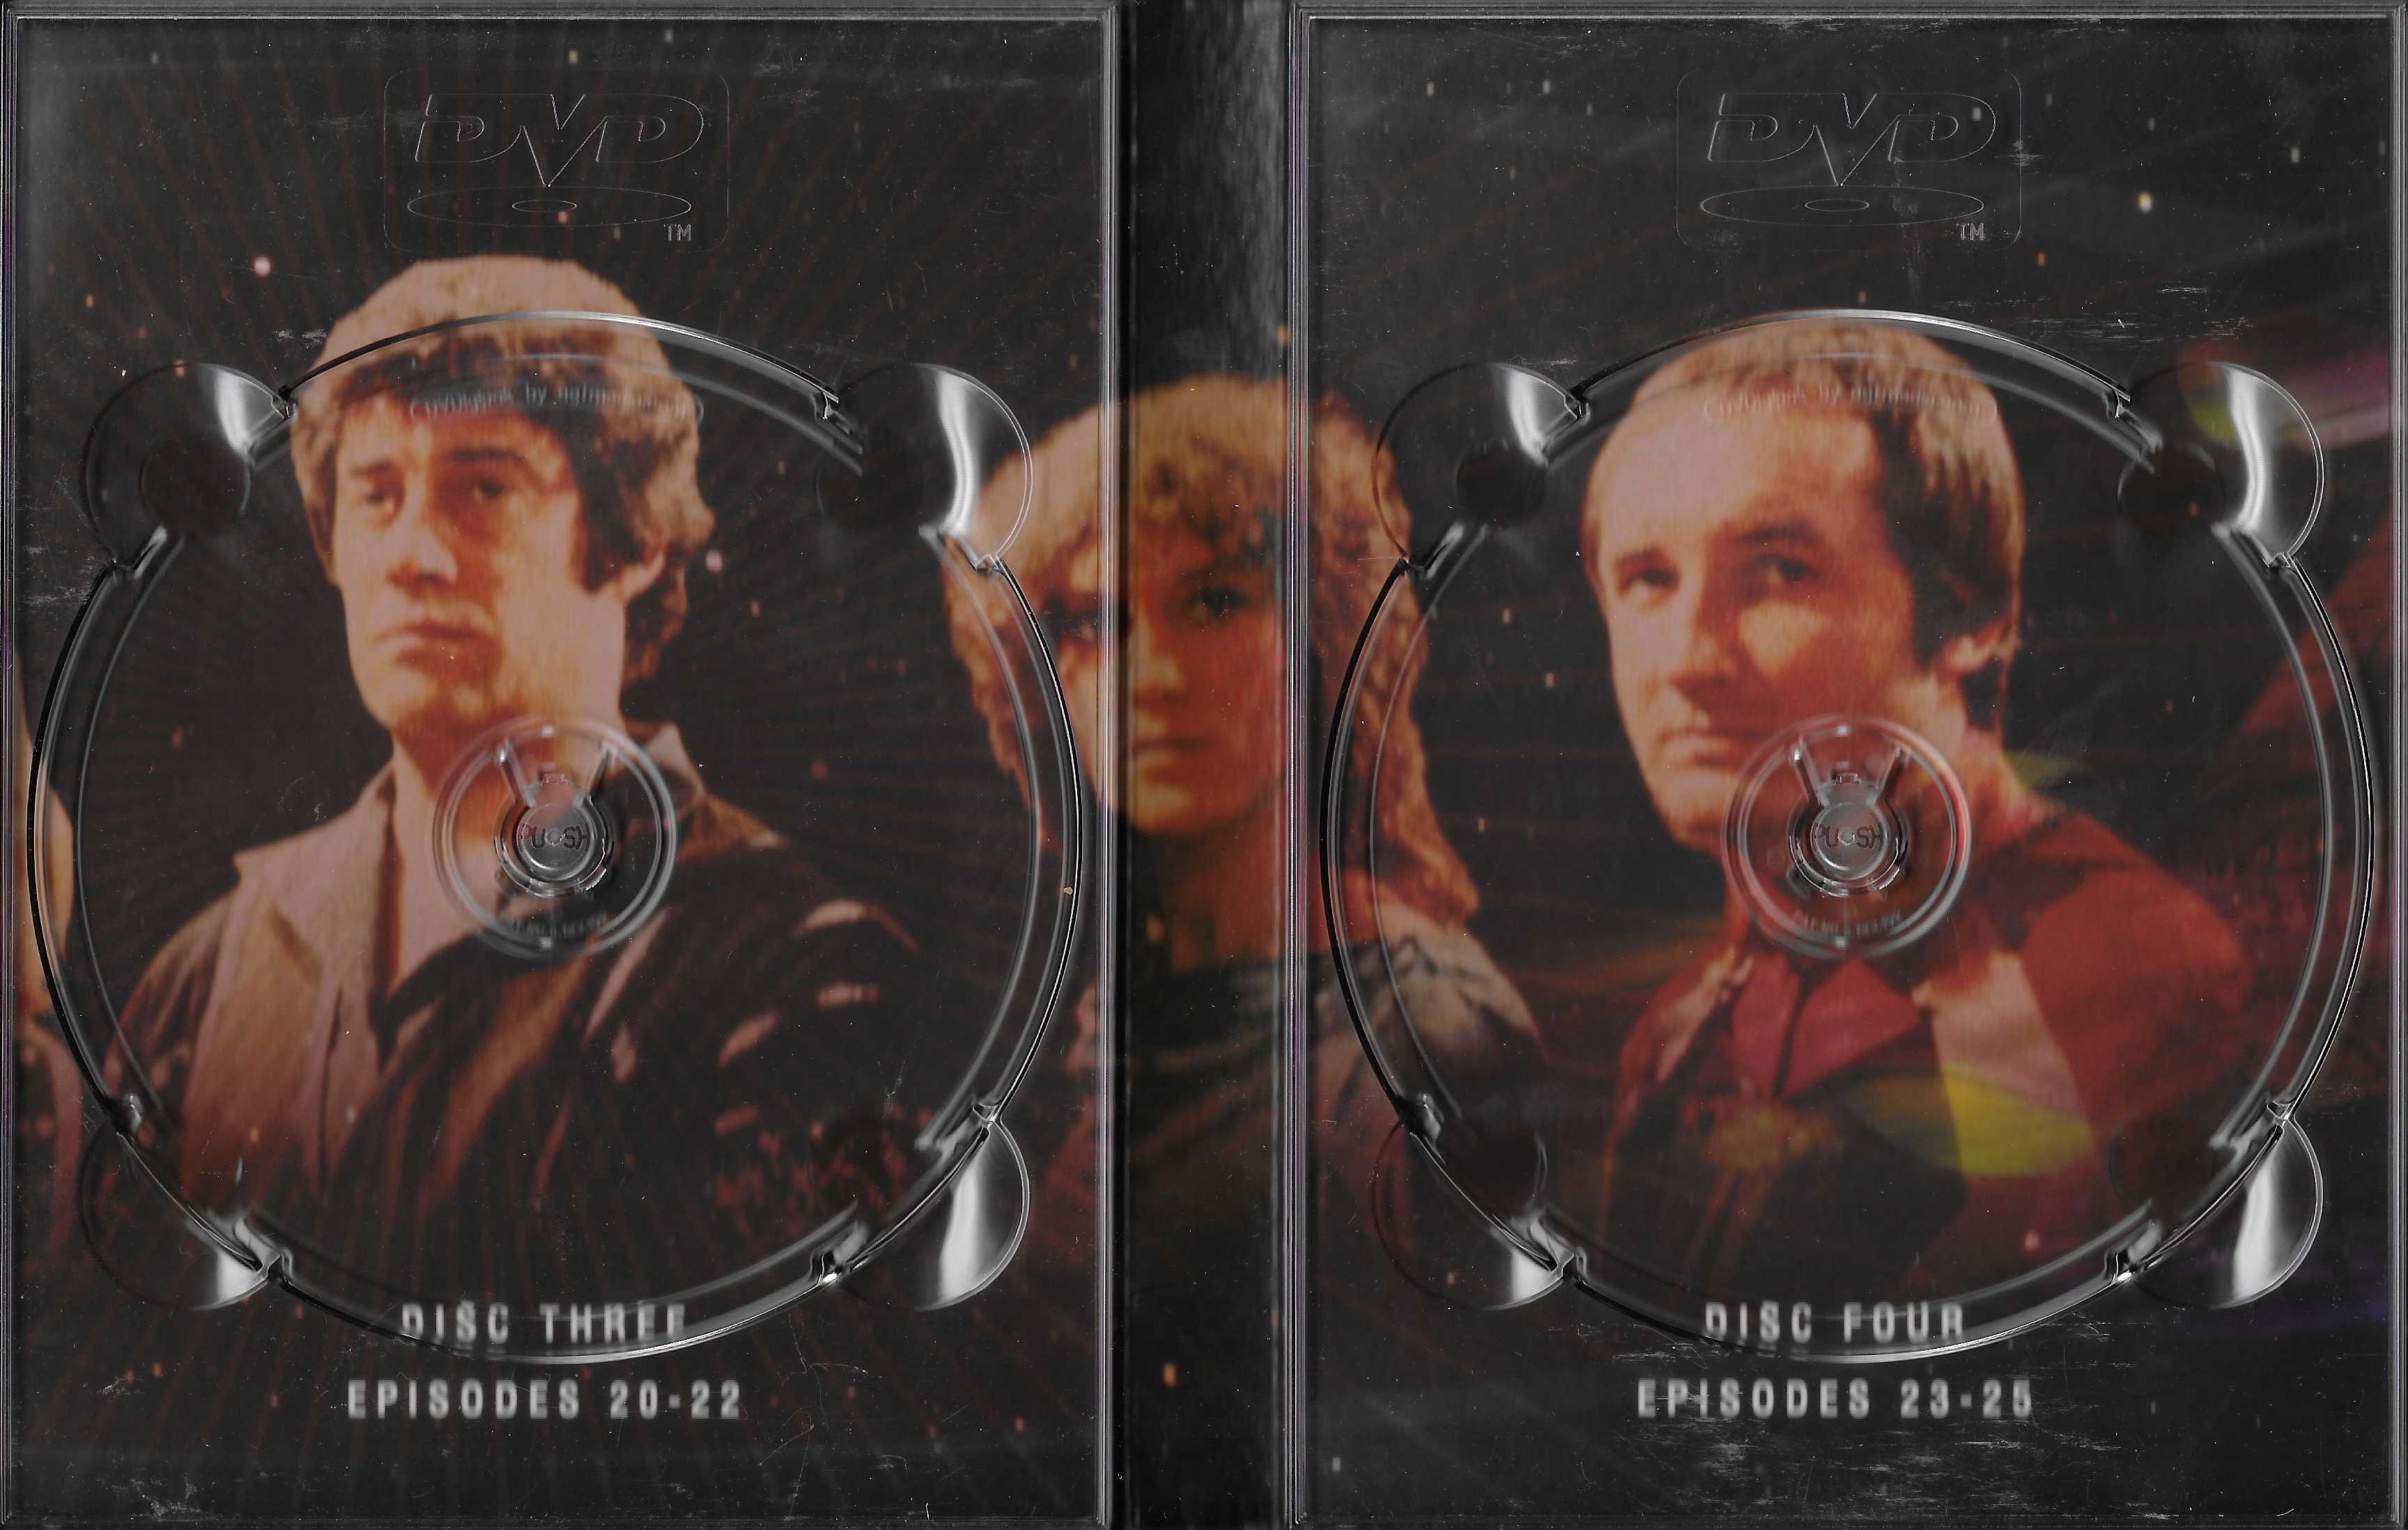 Middle of cover of BBCDVD 1184